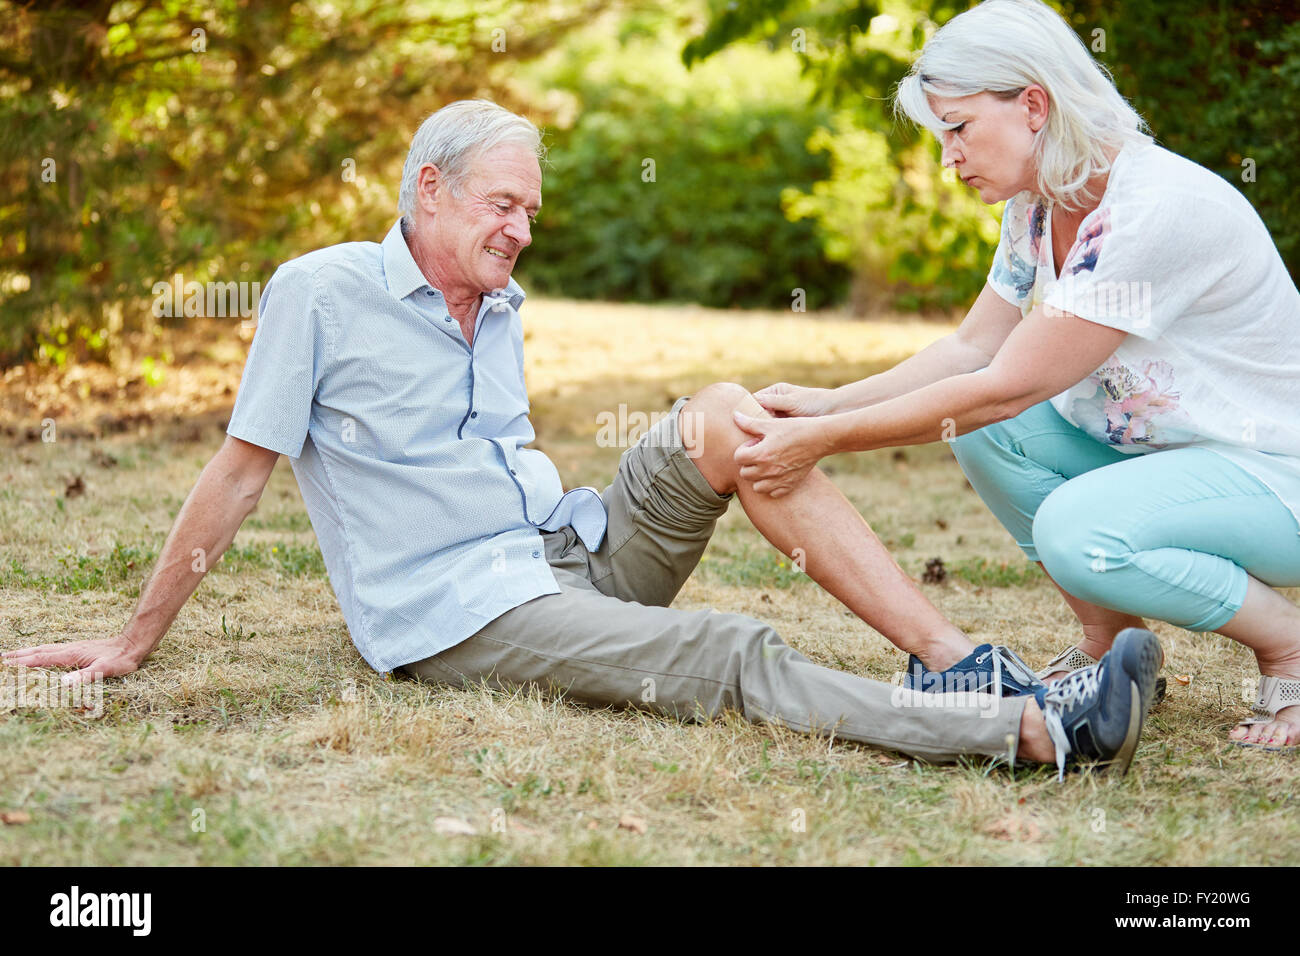 Woman practice first aid on the knee of an old man and puts a plaster on it Stock Photo